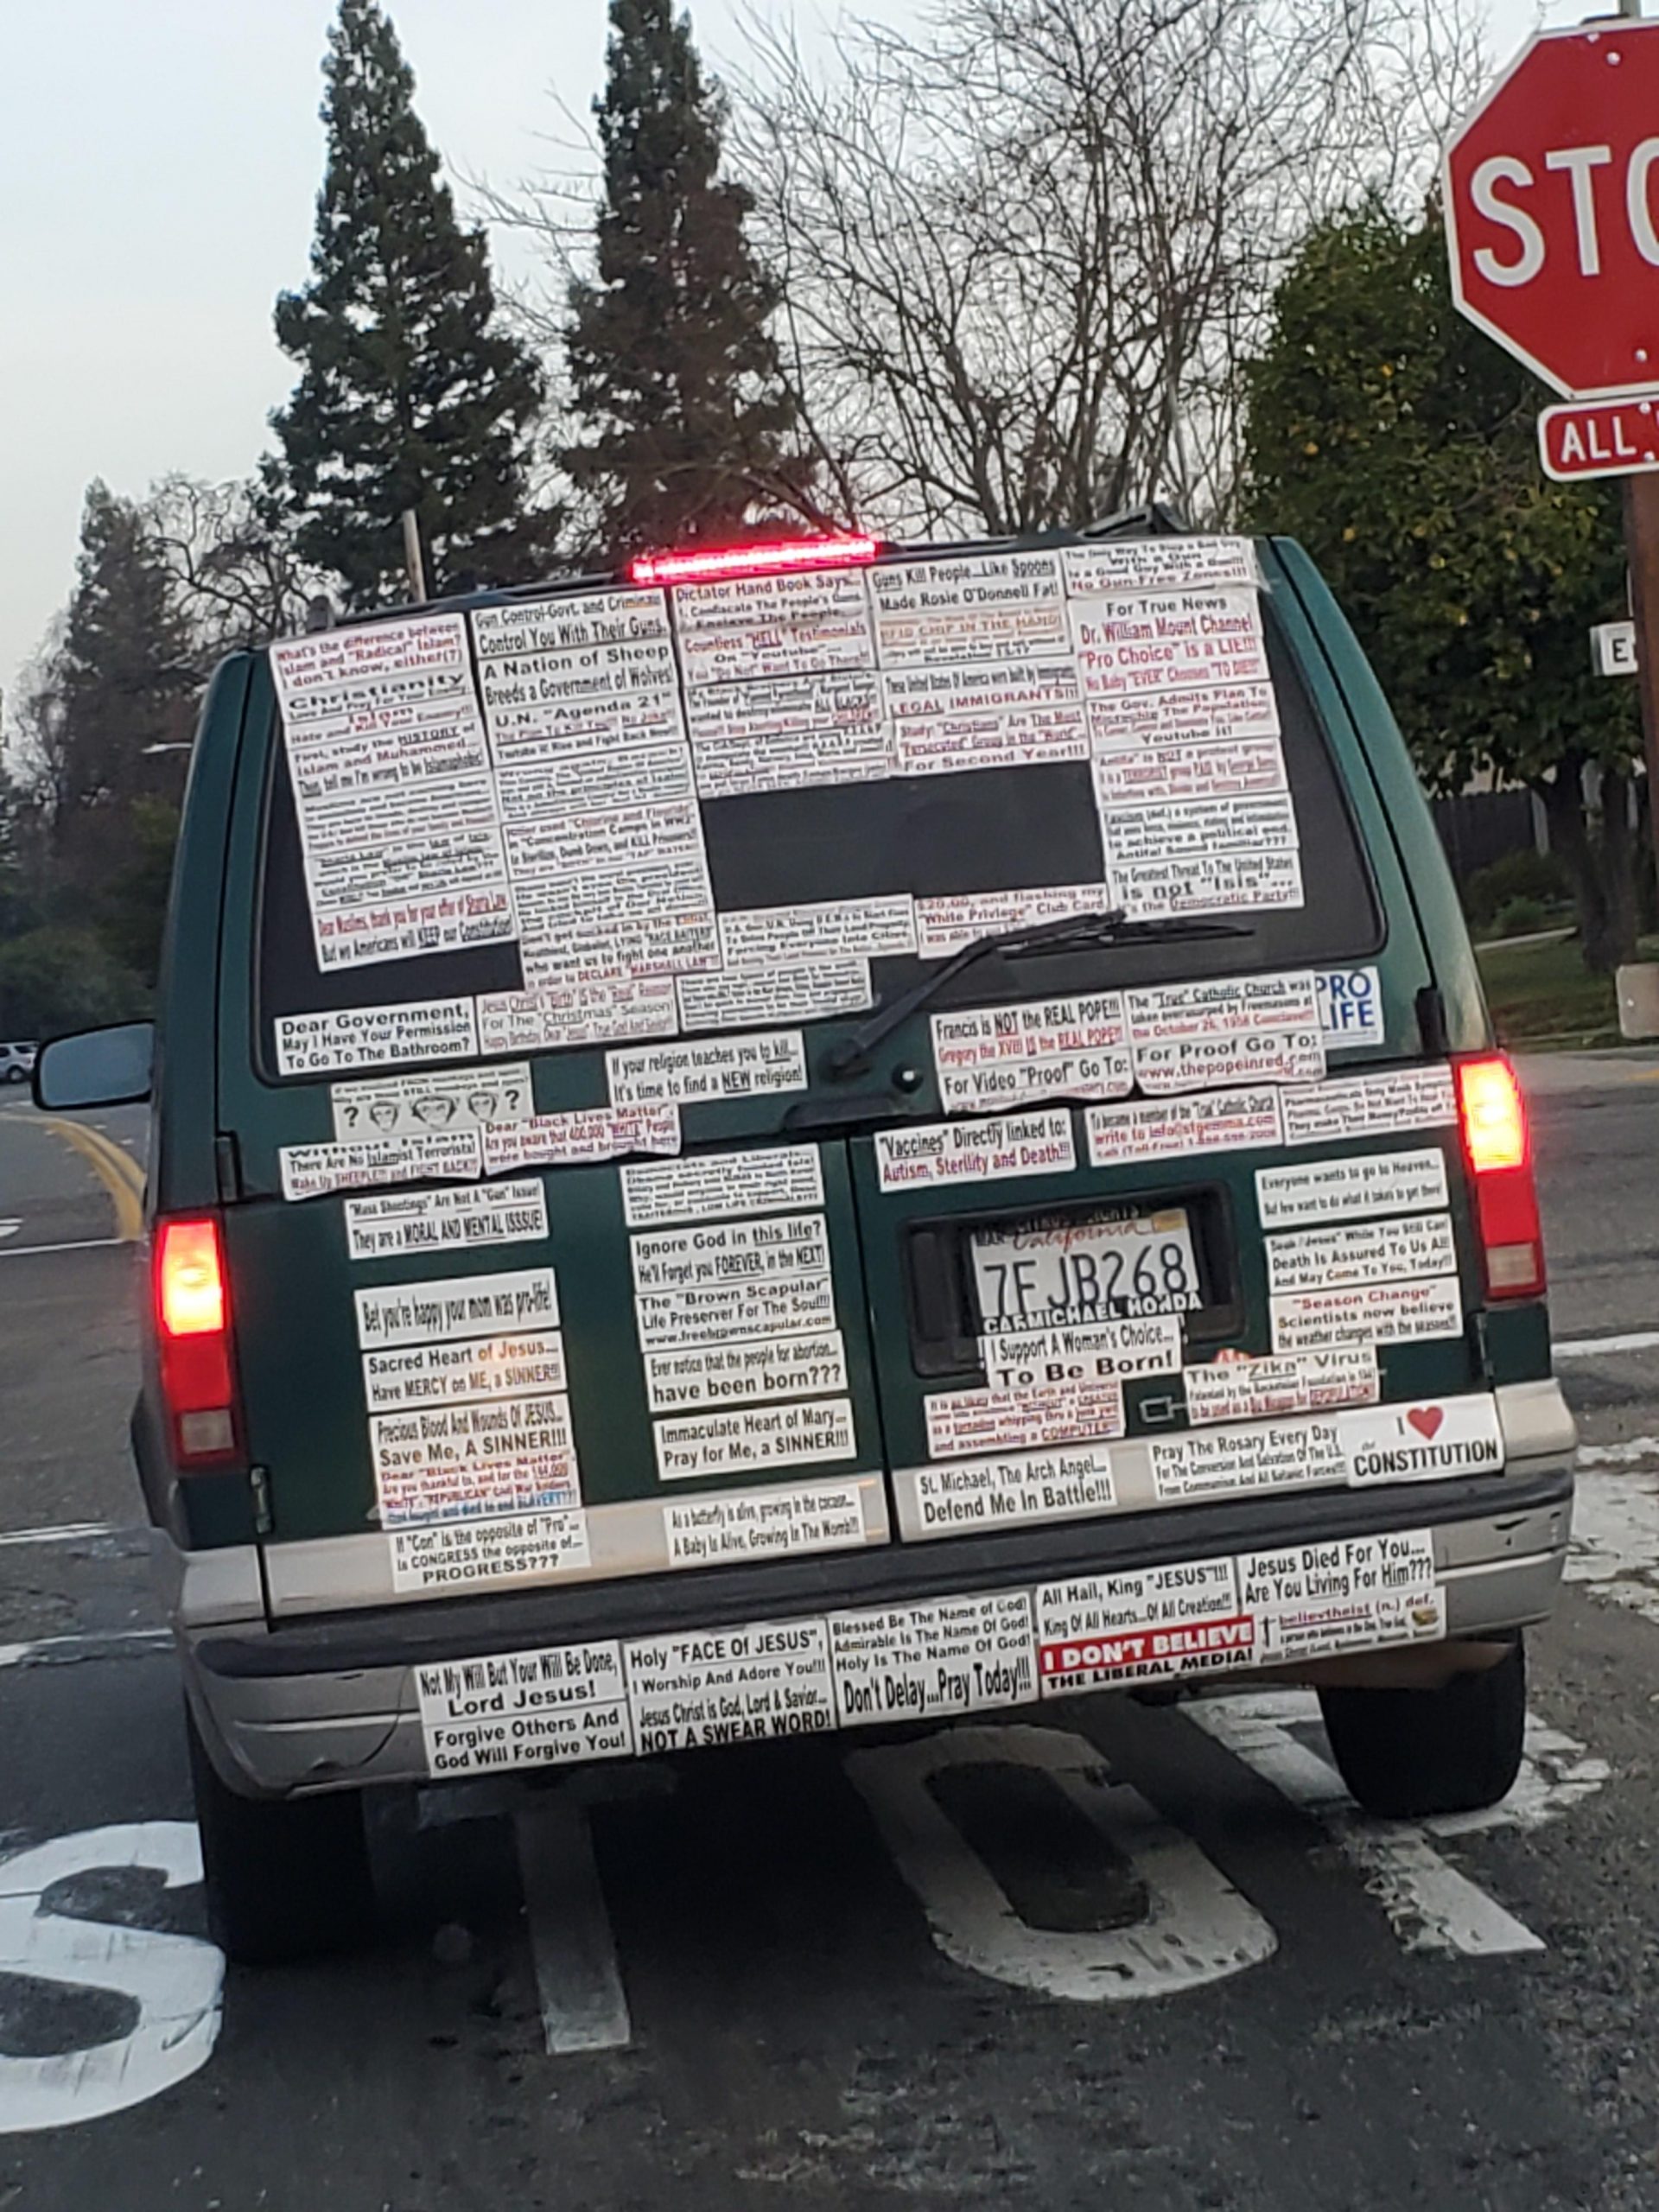 Saw this on the way to school today, "Vaccines directly ...